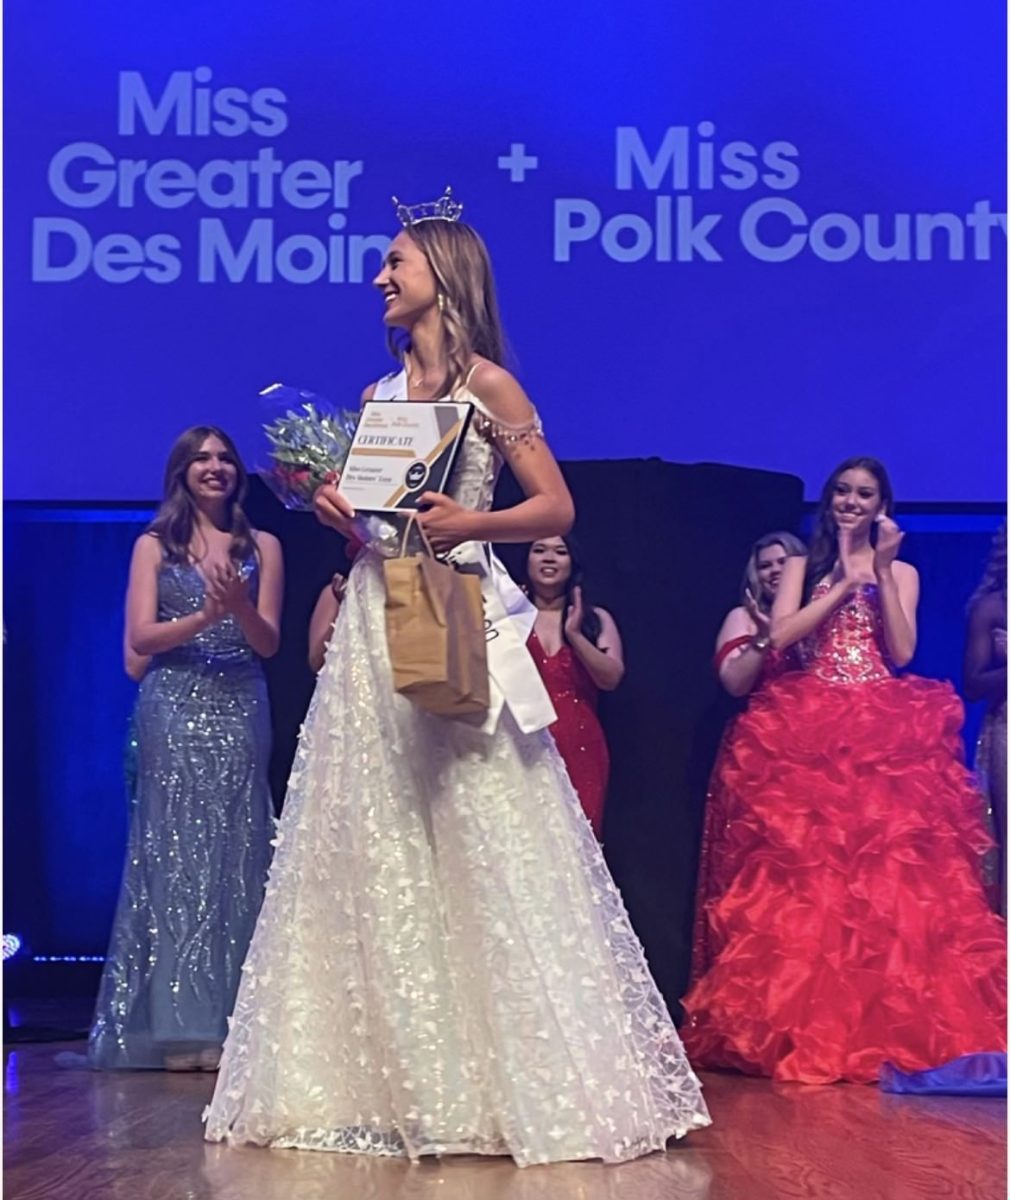 Pleasant+Valley+student+Fiona+Treiber+wins+the+title+of+Ms.+Greater+Des+Moines+teen.+Photo+credit+to+Estelle+Treiber.%0A